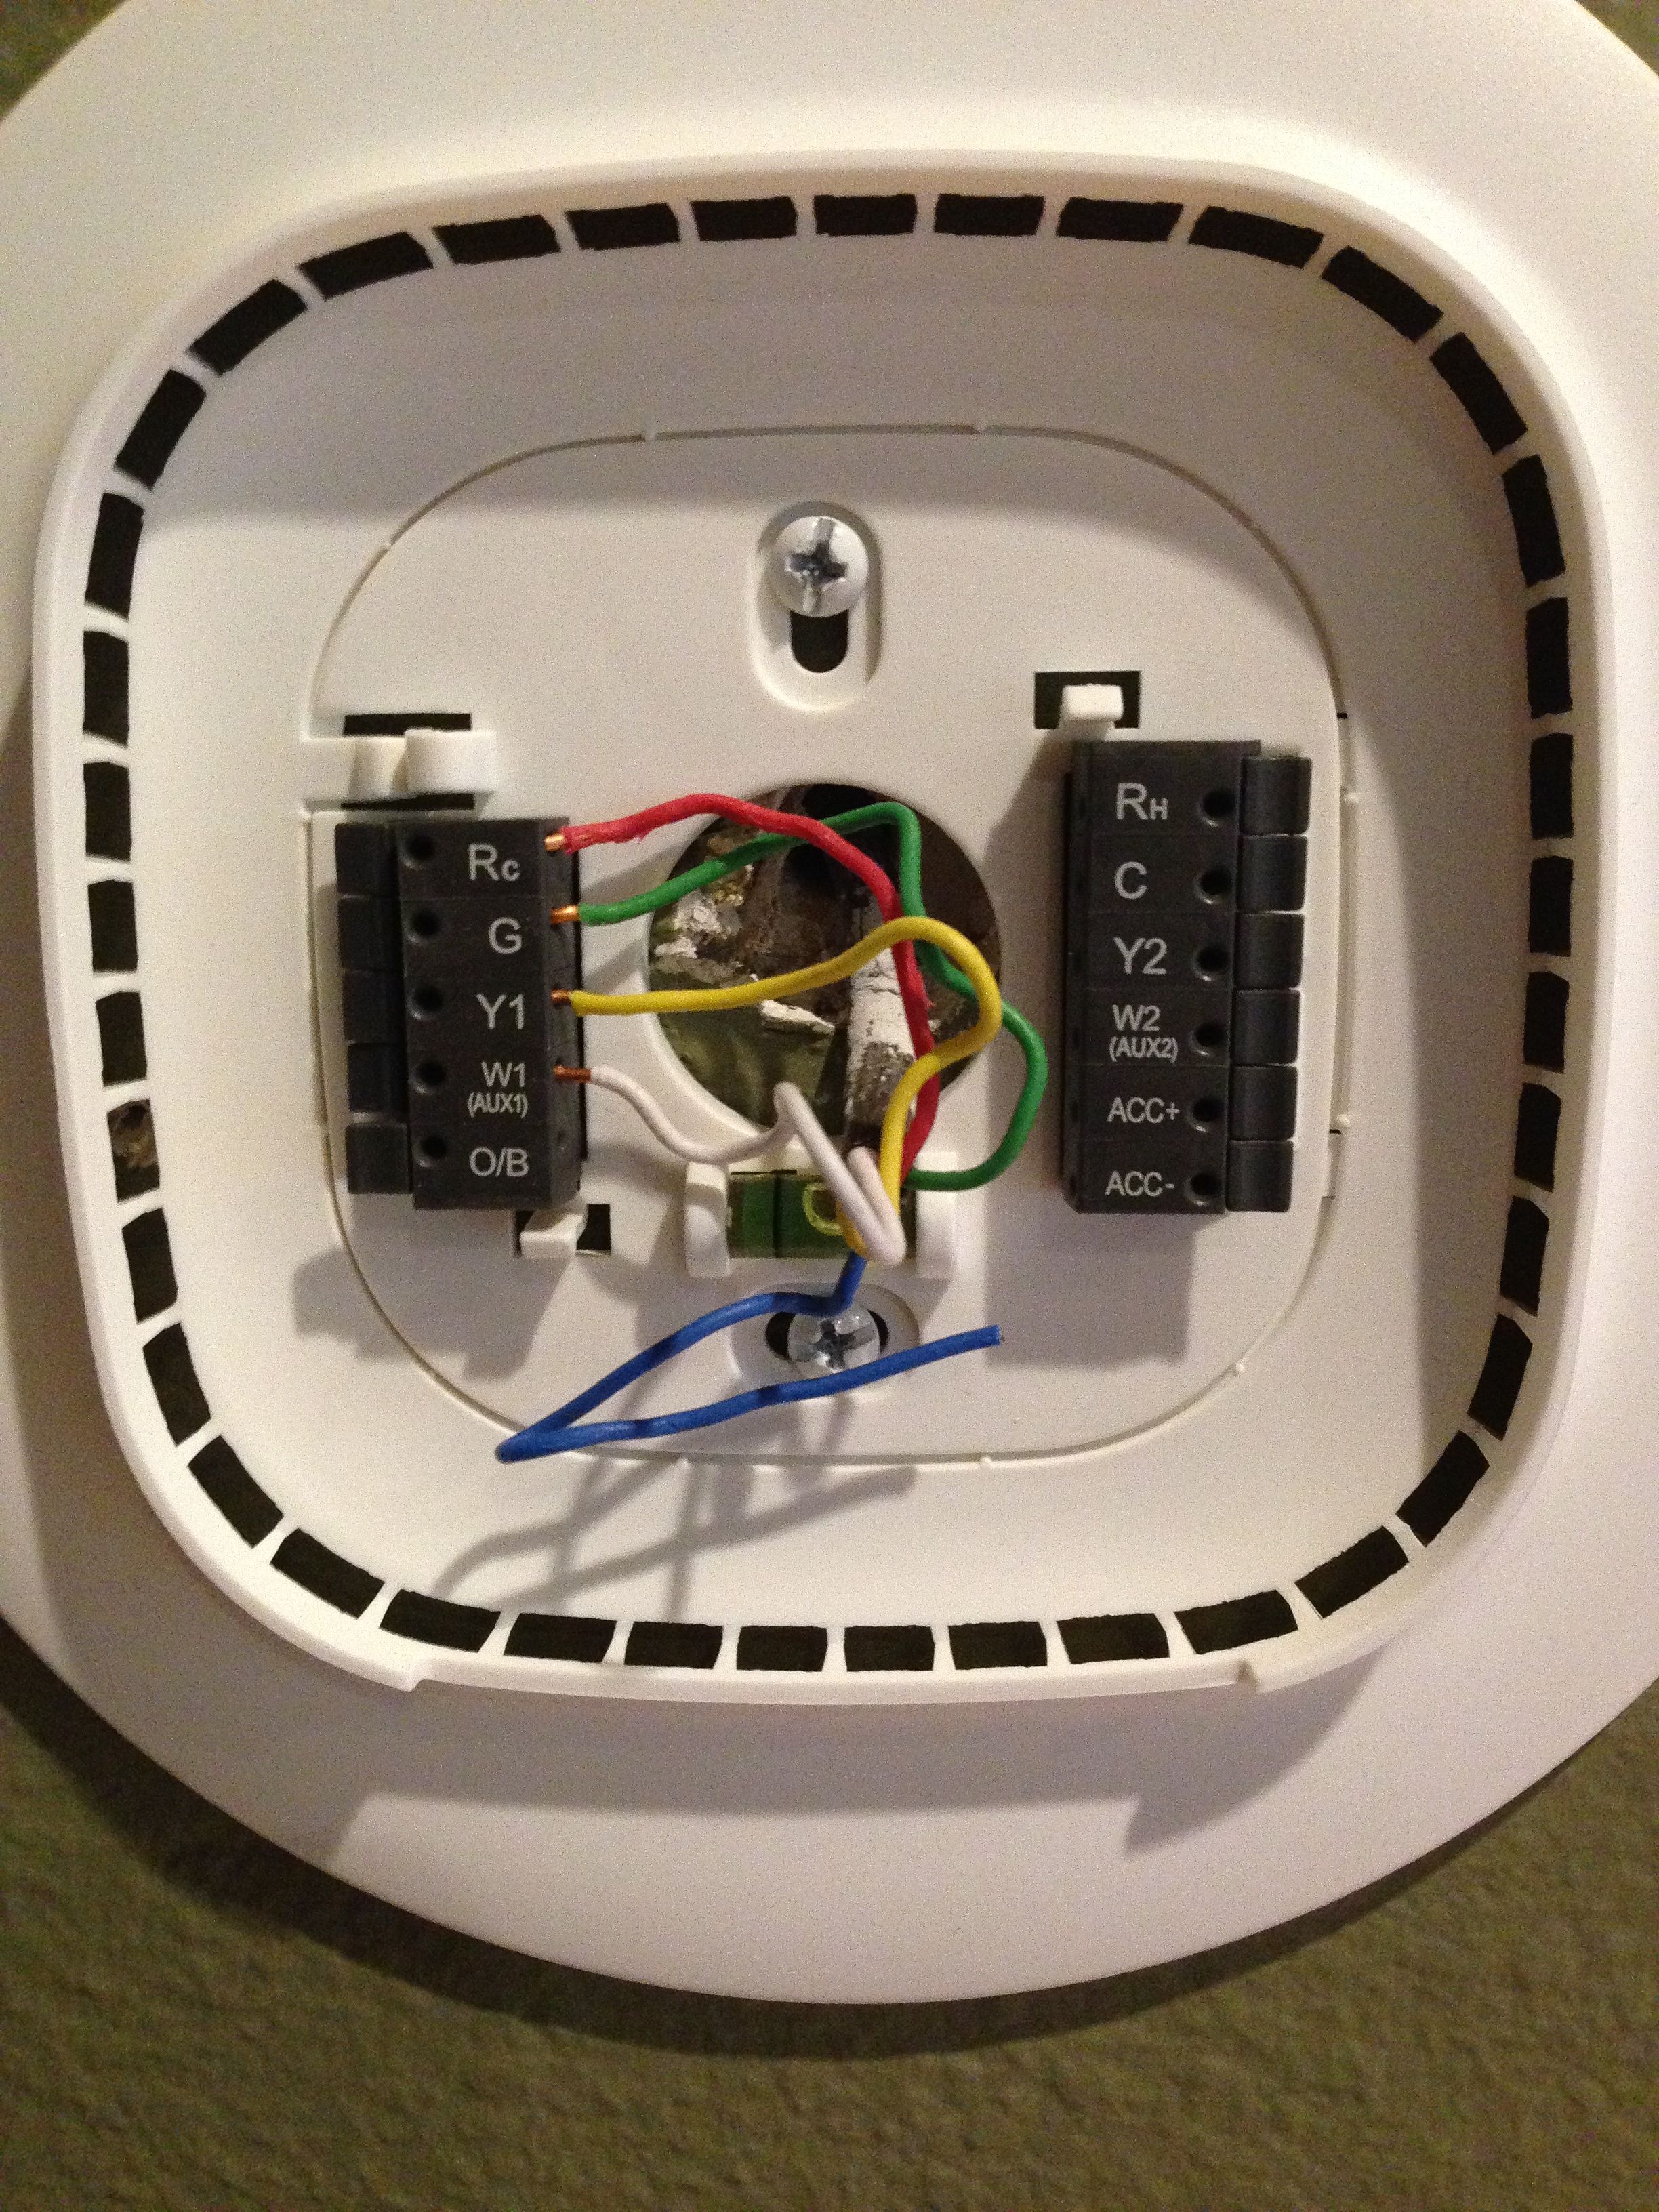 How do two stage thermostats work?